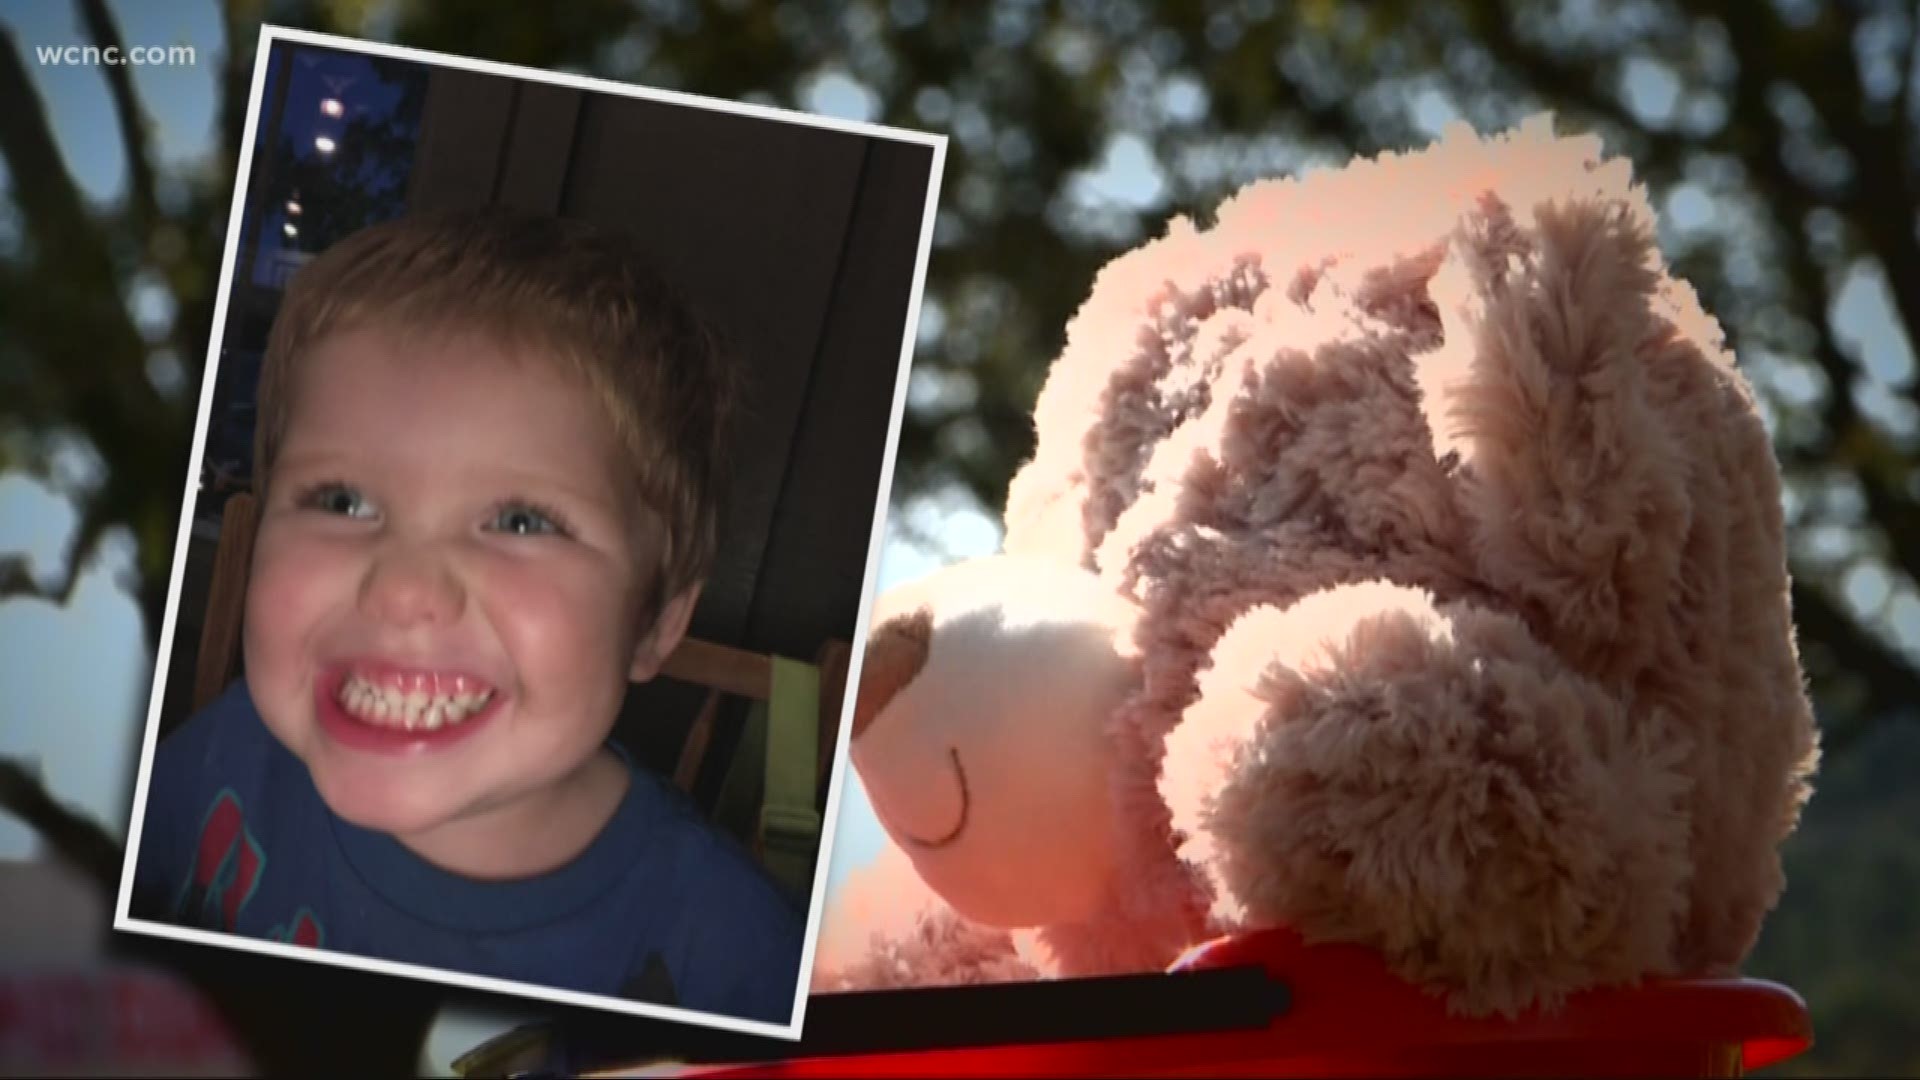 Family says Bruce Fleming's third birthday was coming up this weekend. Now instead of a party, they're preparing for a funeral.
    we just got this picture of 'bruce fleming' -- you can see a big, bright smile on his face.